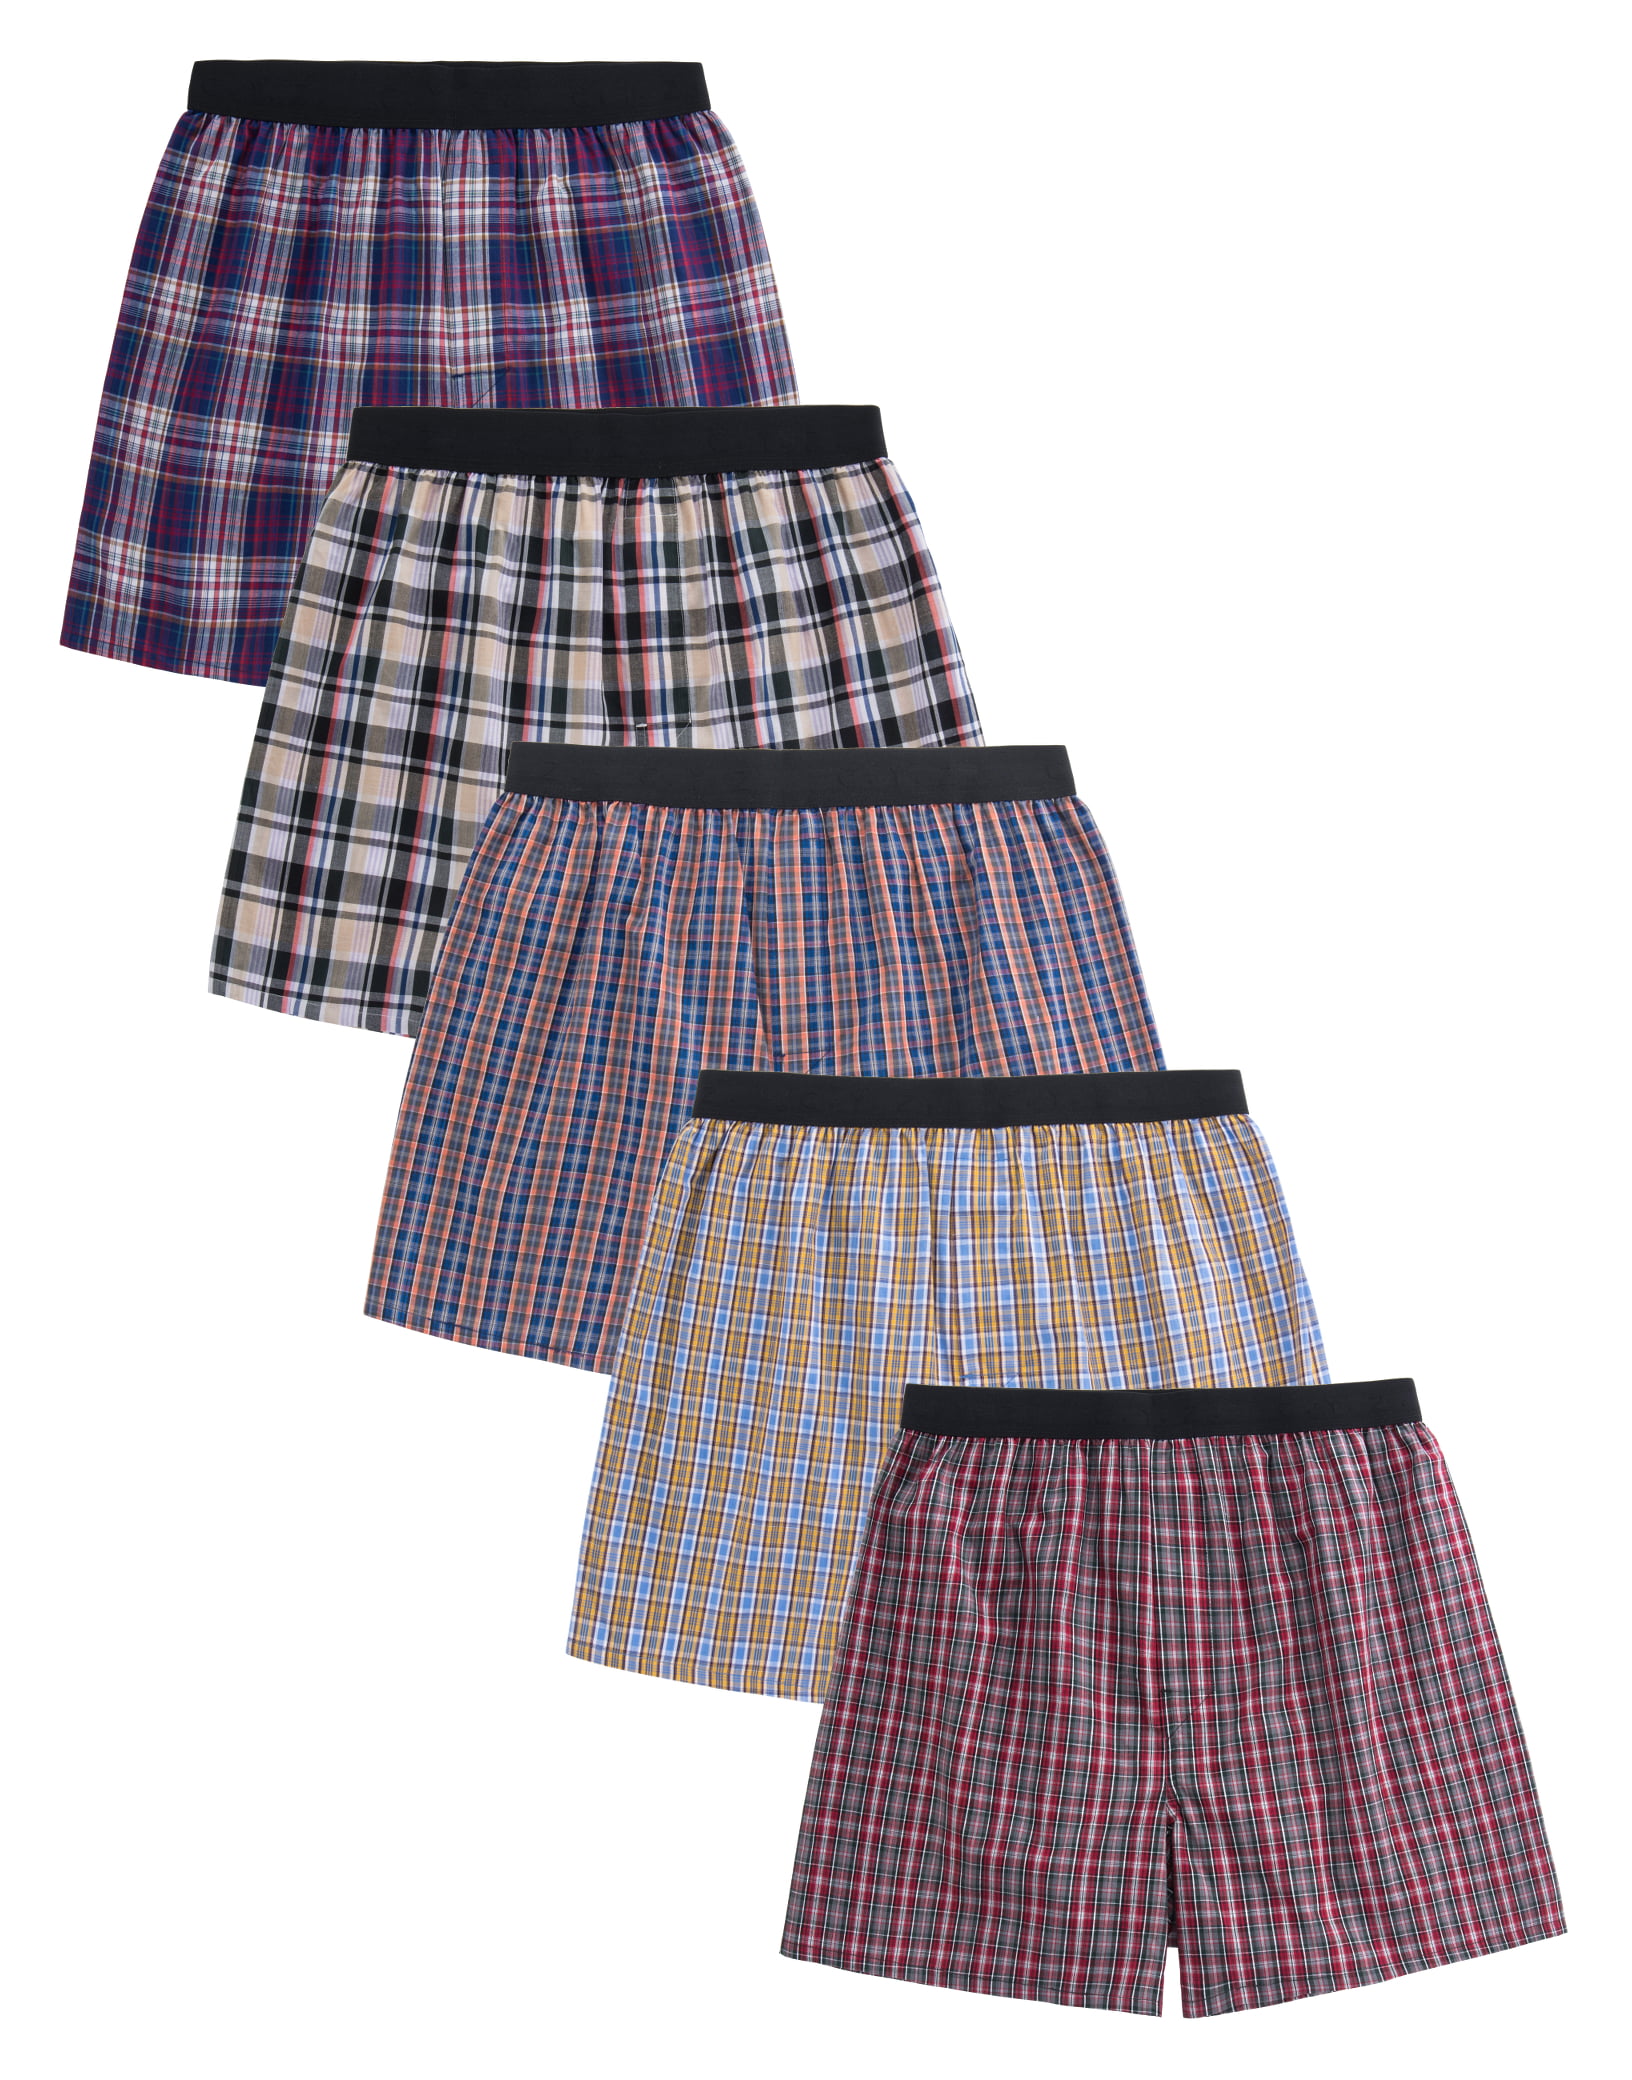 CYZ 5-Pack Men's 100% Cotton Woven Boxers Value Pack-Assorted-2XL ...